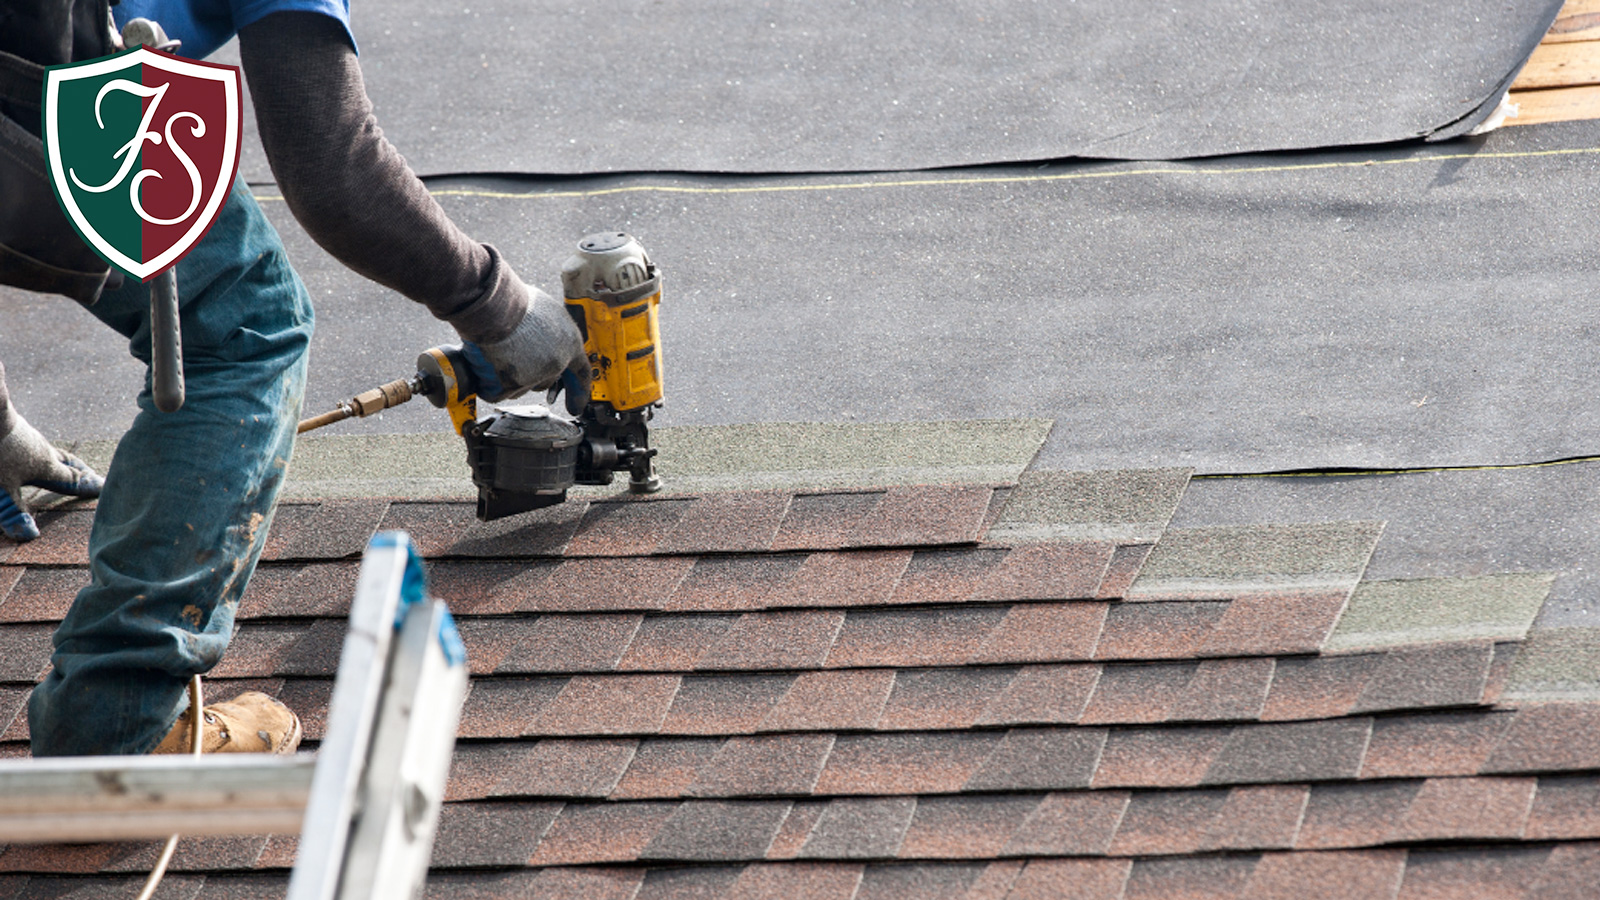 Roof replacement doesn’t take long, and with a few modifications you should be able to work around each other.